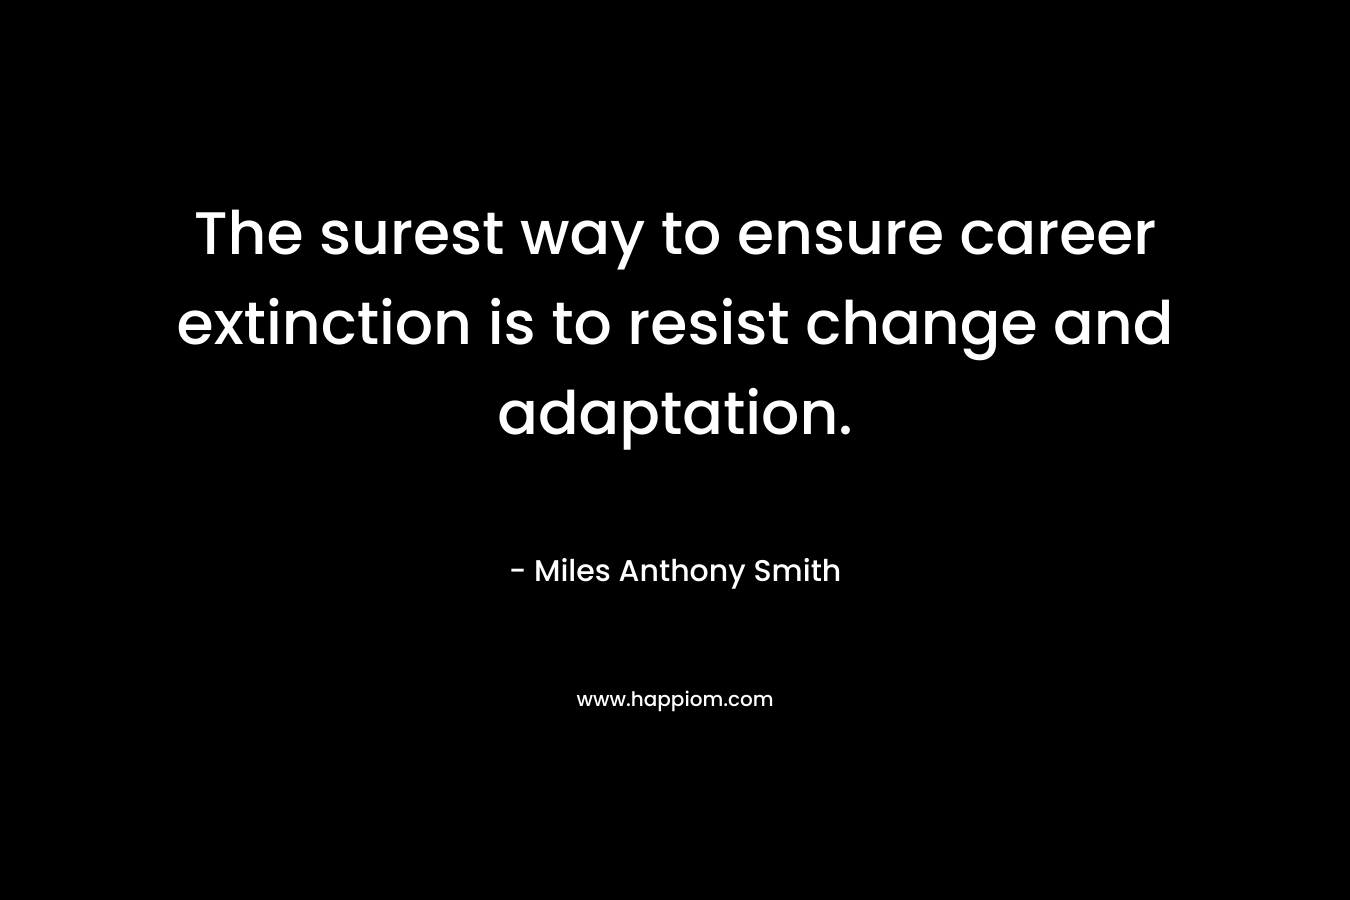 The surest way to ensure career extinction is to resist change and adaptation.